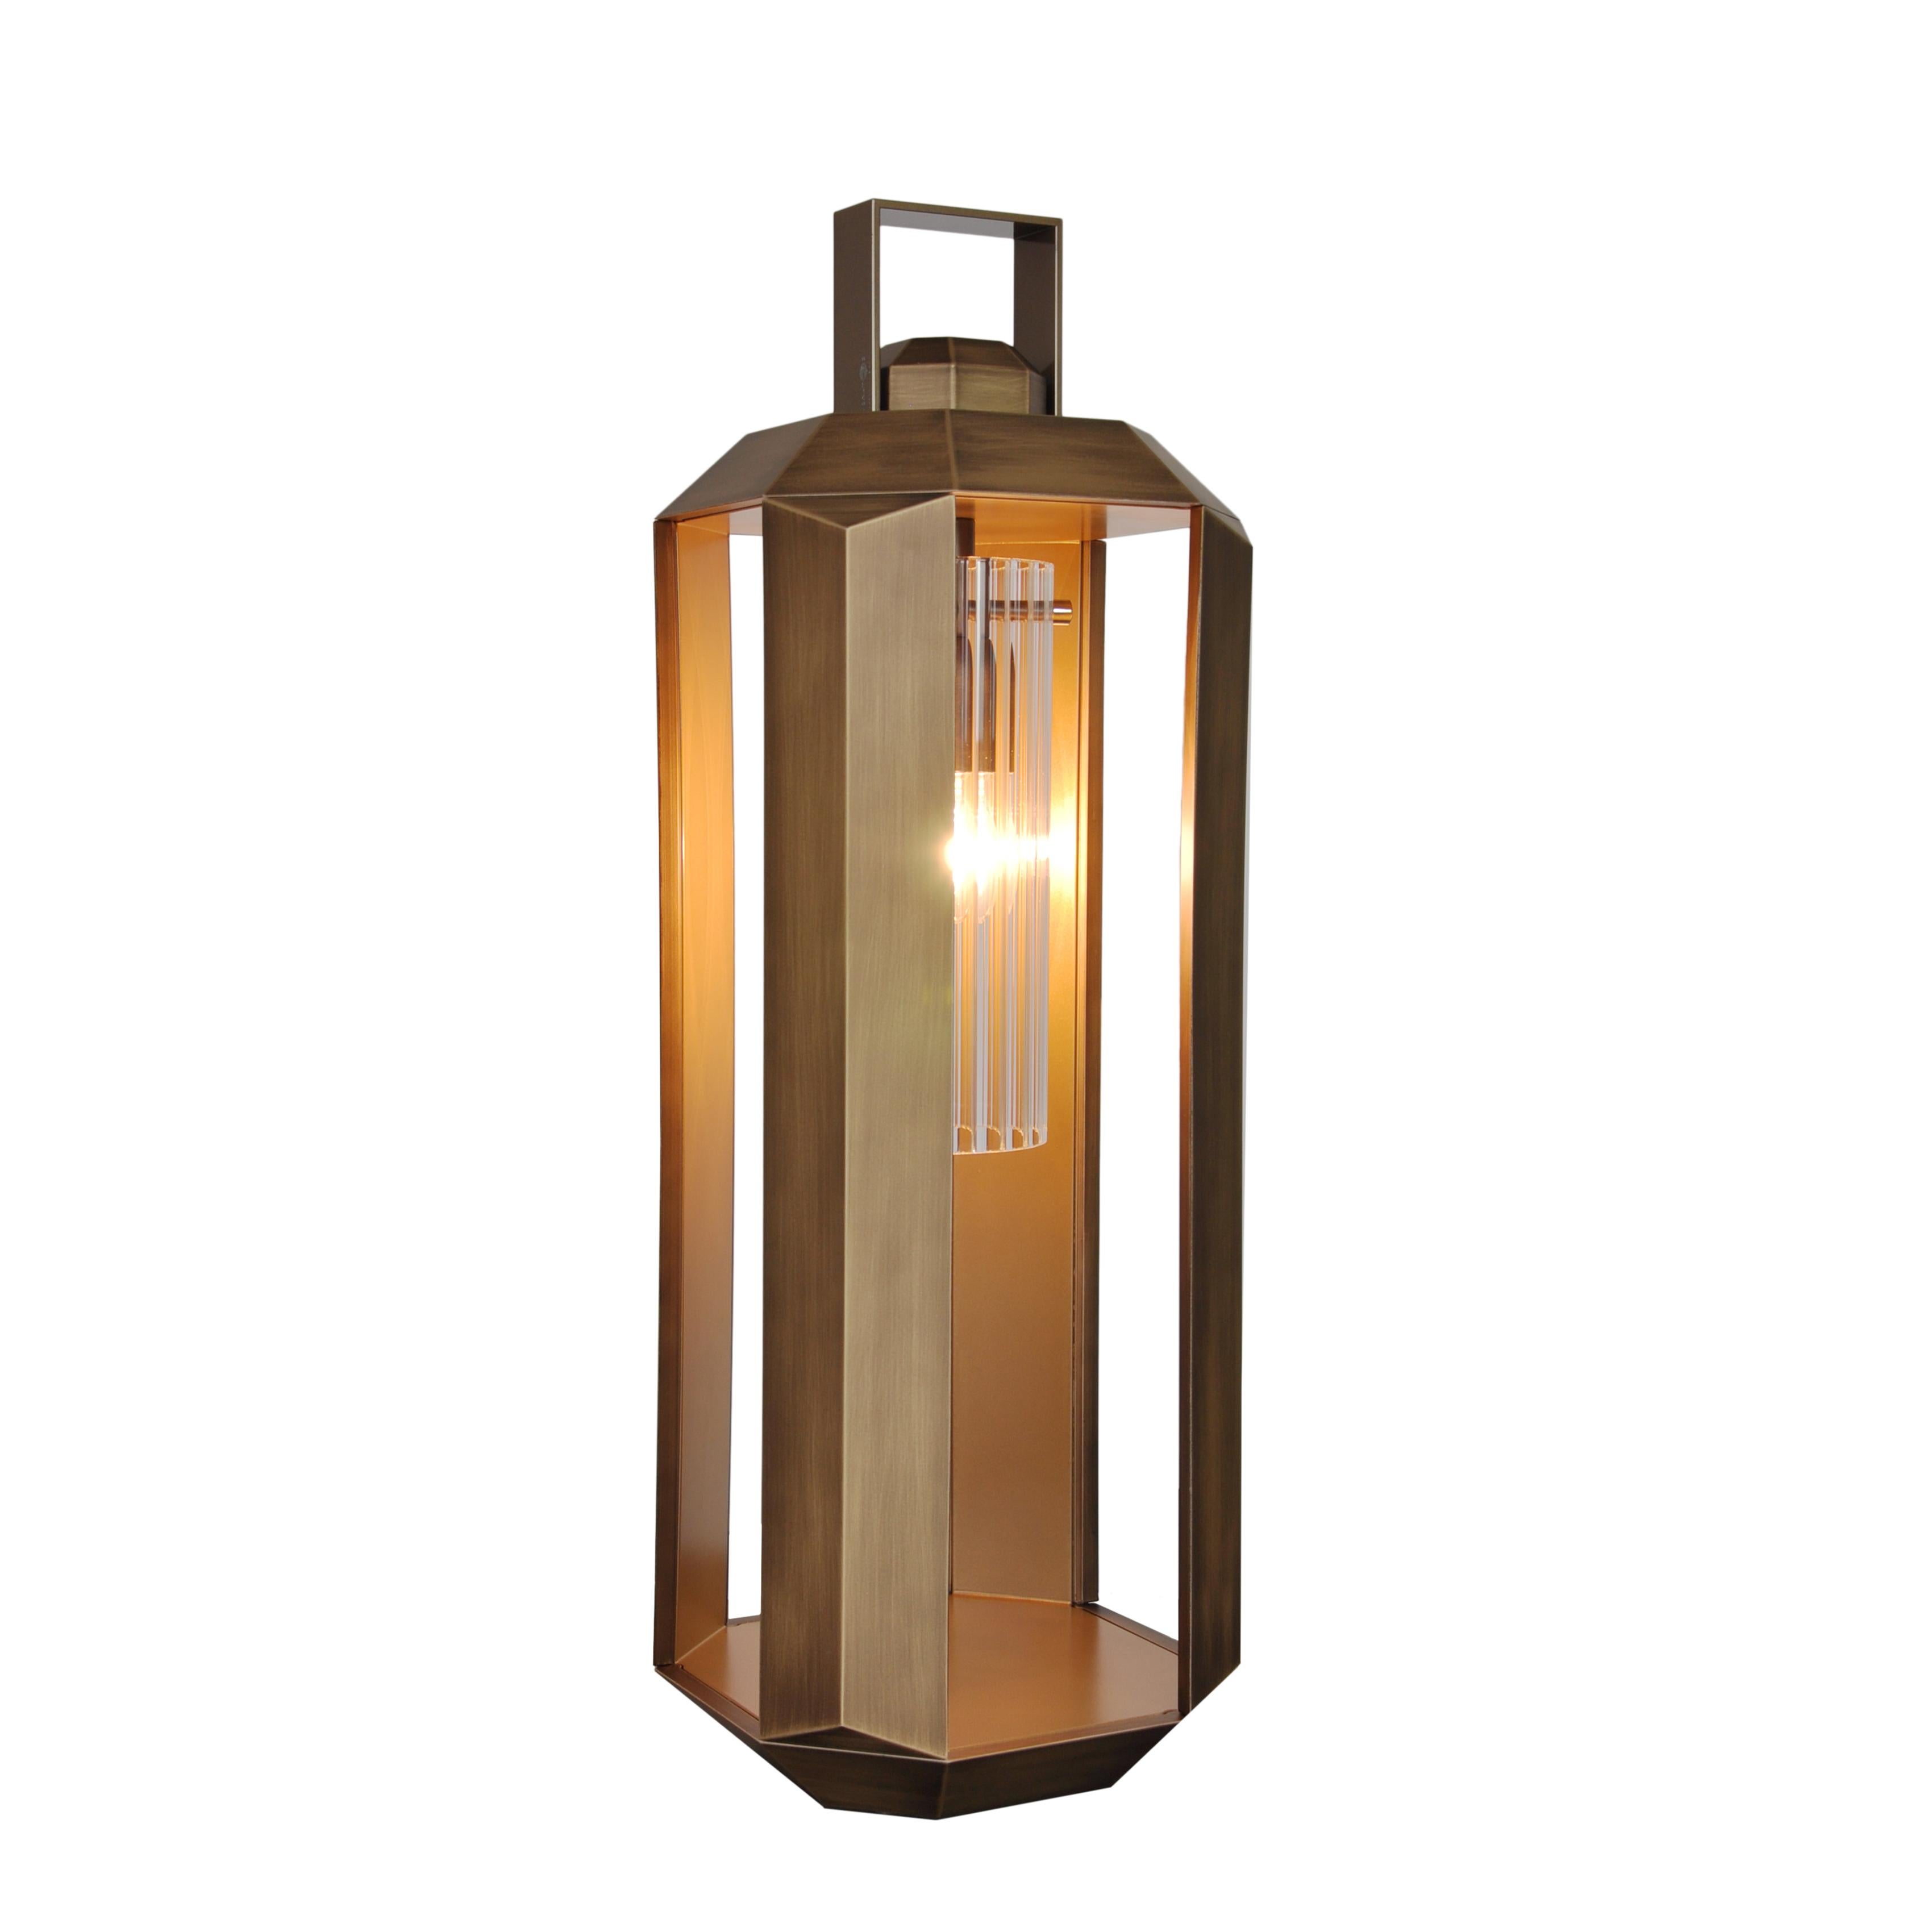 The external structure in composite material is finished in bronze through new painting techniques with metal powders: it is impossible to tell if it is metal or not, the effect is that of satin bronze. The inner part of the lantern is in gold